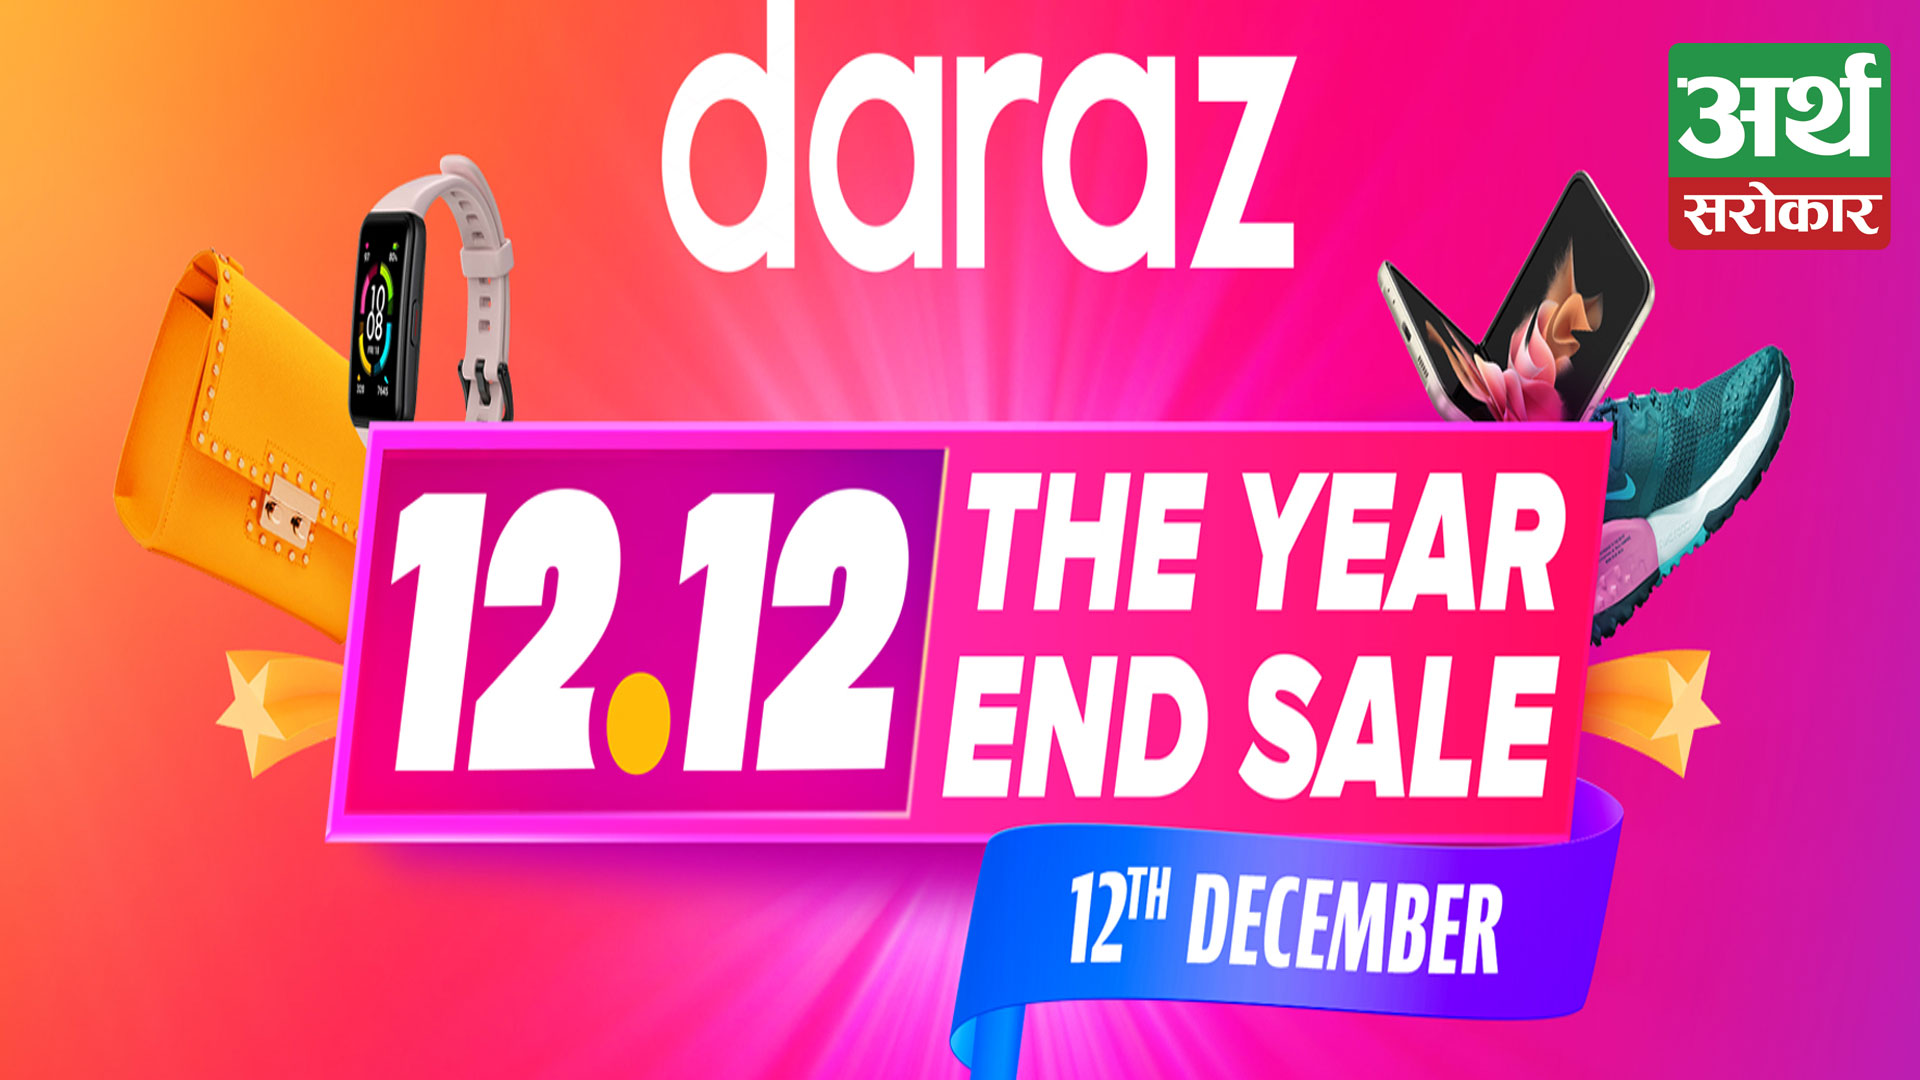 KNOW ALL ABOUT DARAZ 12.12 YEAR END SALE – VOUCHERS, MEGA DEALS, FREE SHIPPING & MORE